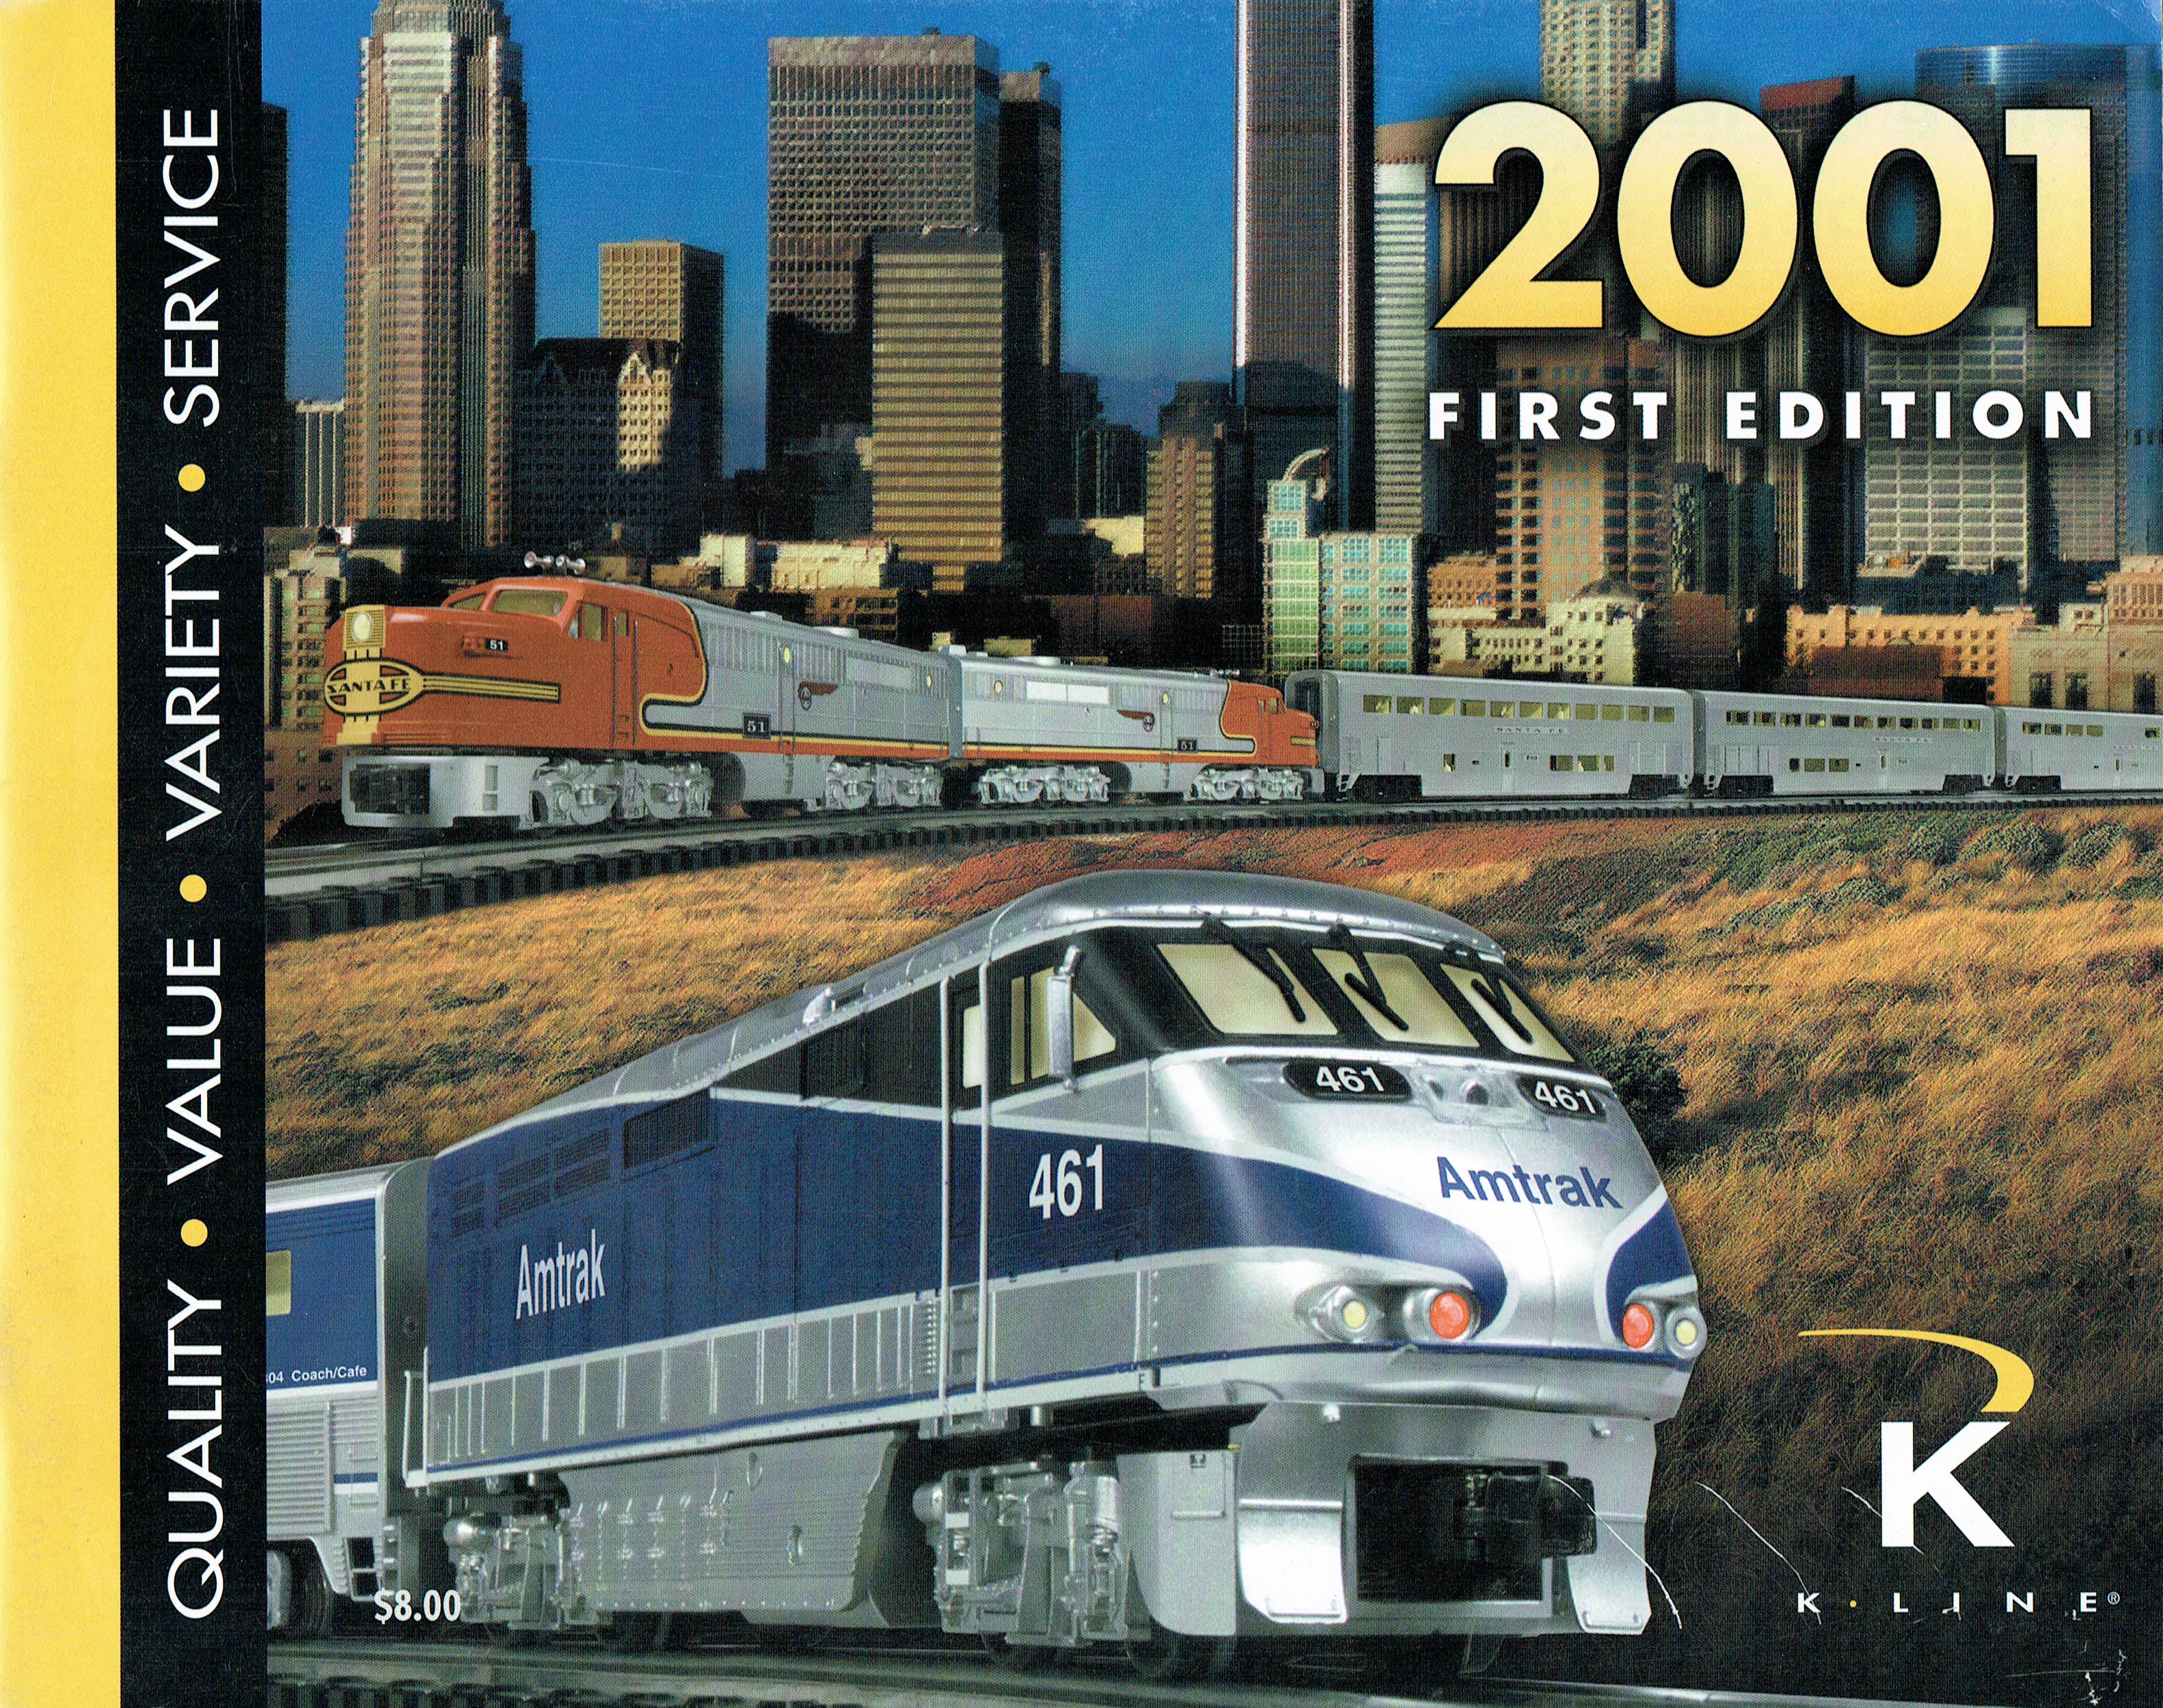 K-Line 2001 First Edition Catalog image